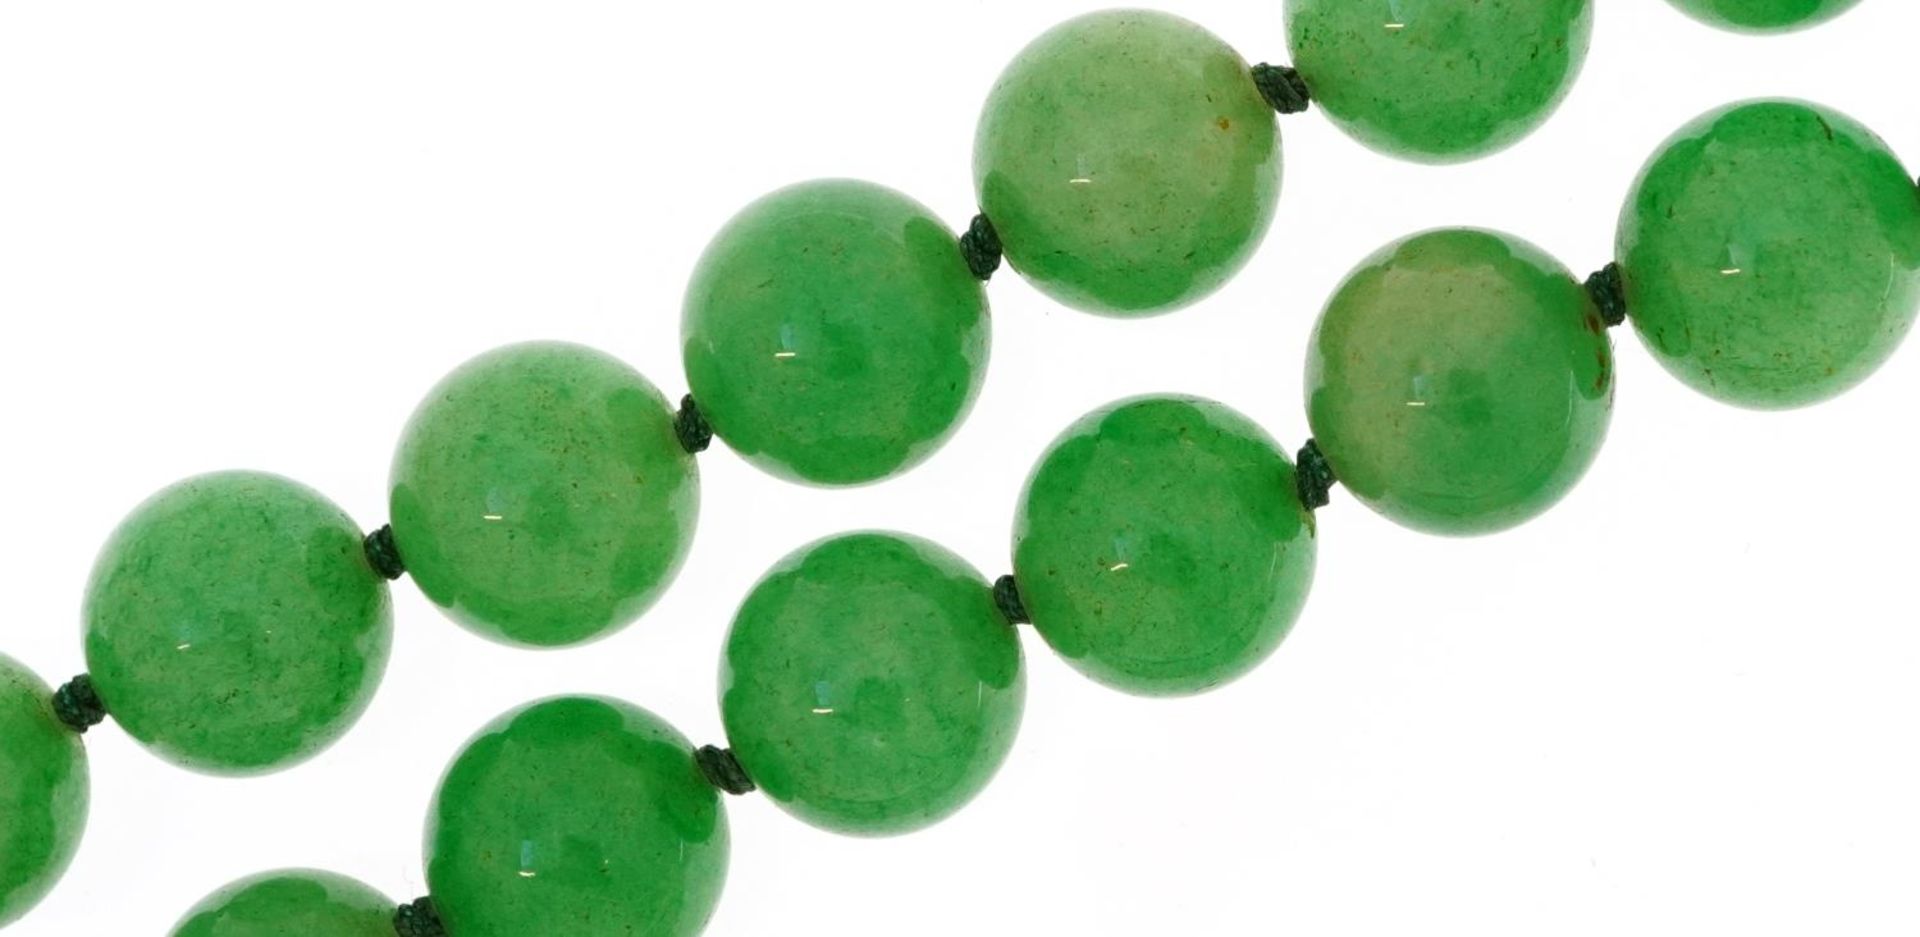 Chinese green jade bead necklace, each bead 12mm in diameter, overall 90cm in length, 159.2g